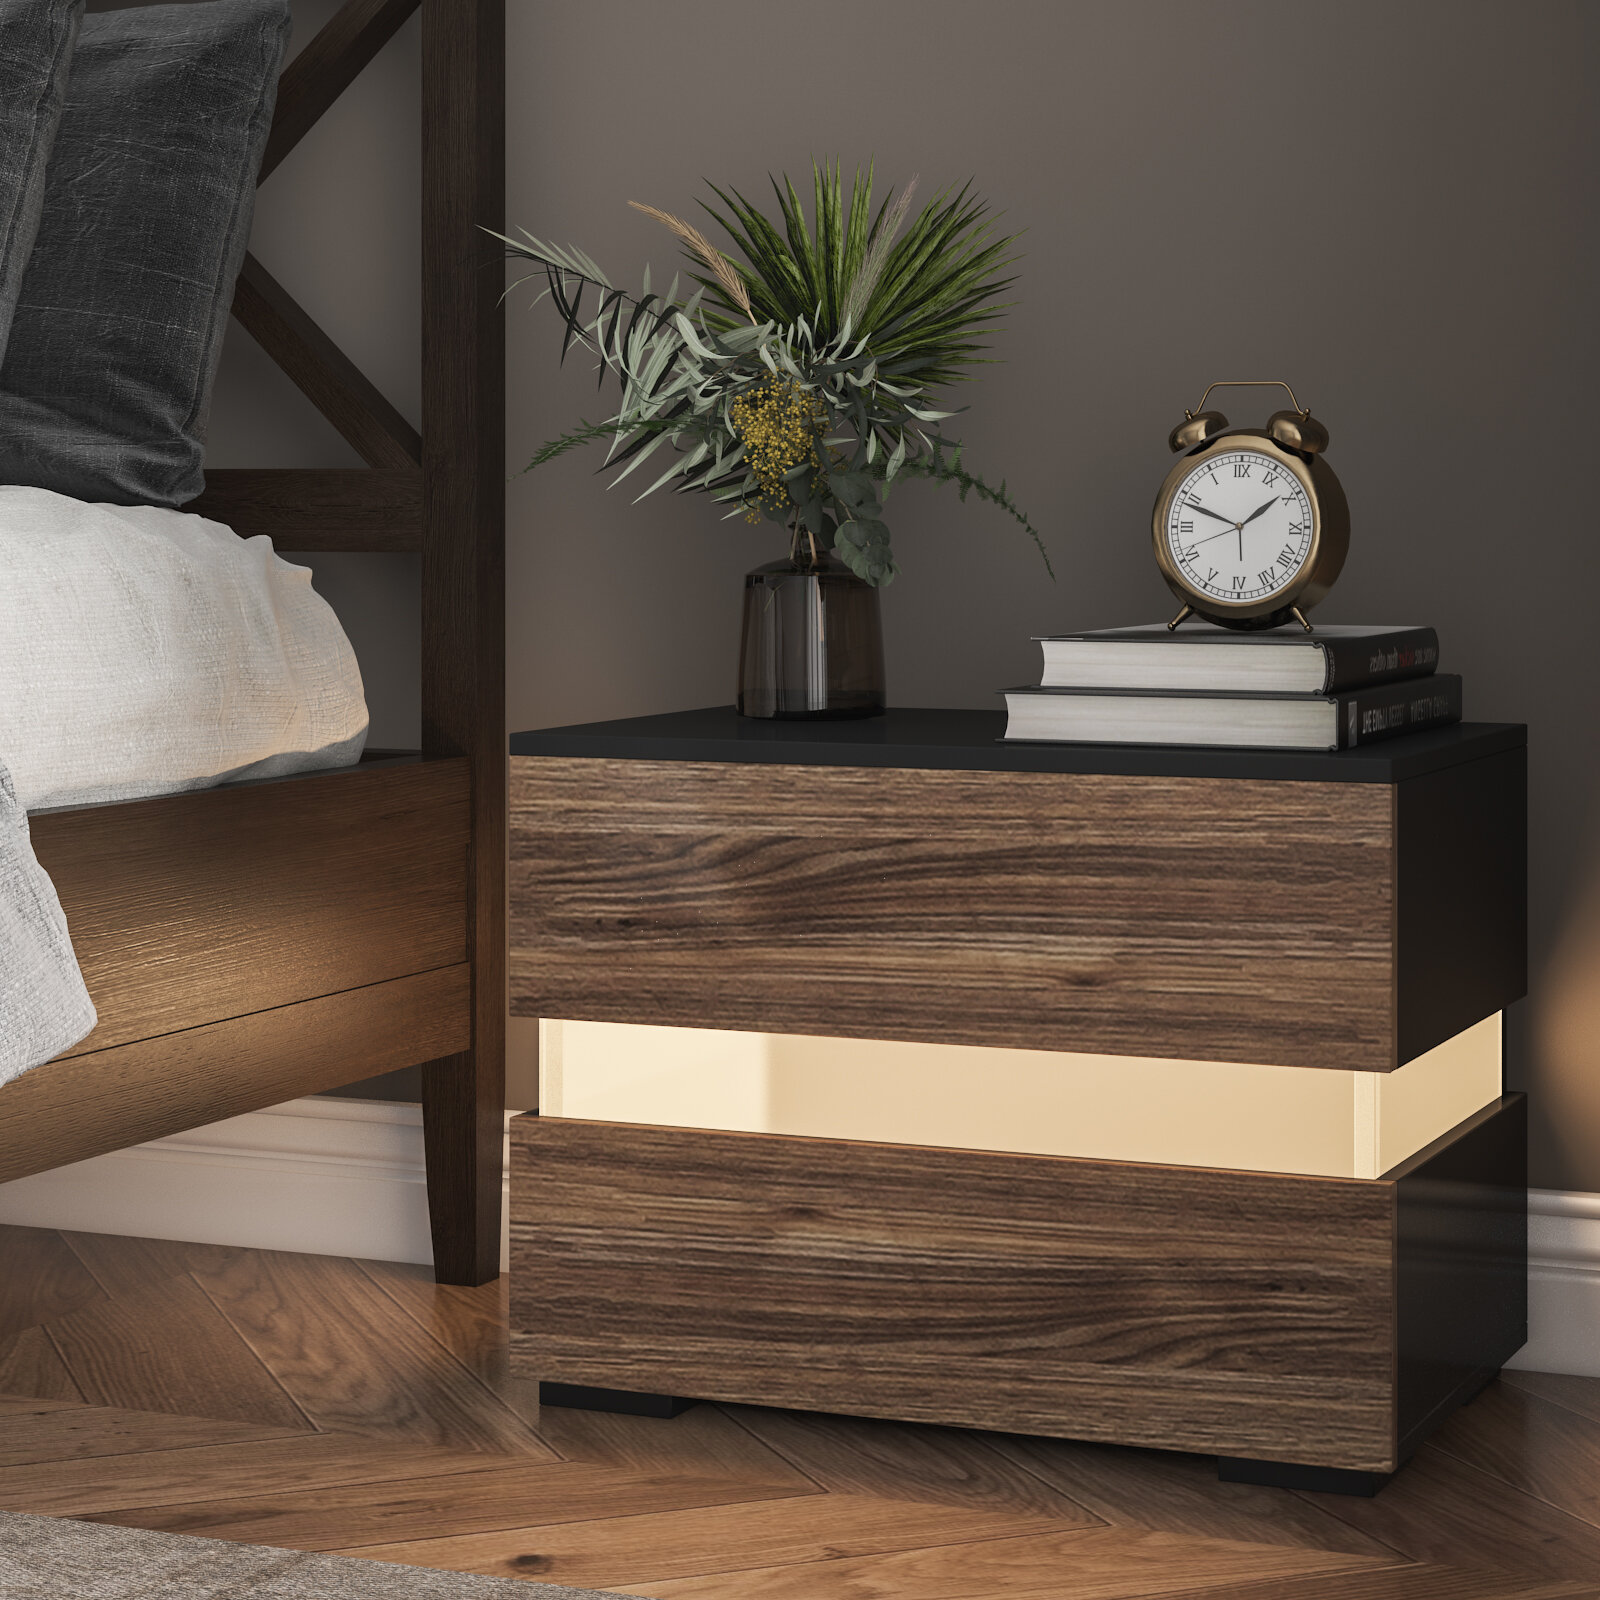 Image of Hommpa LED Modern Design Nightstand Bedside Table Cabinet with 2 Drawers Brownfor Bedroom Living Room